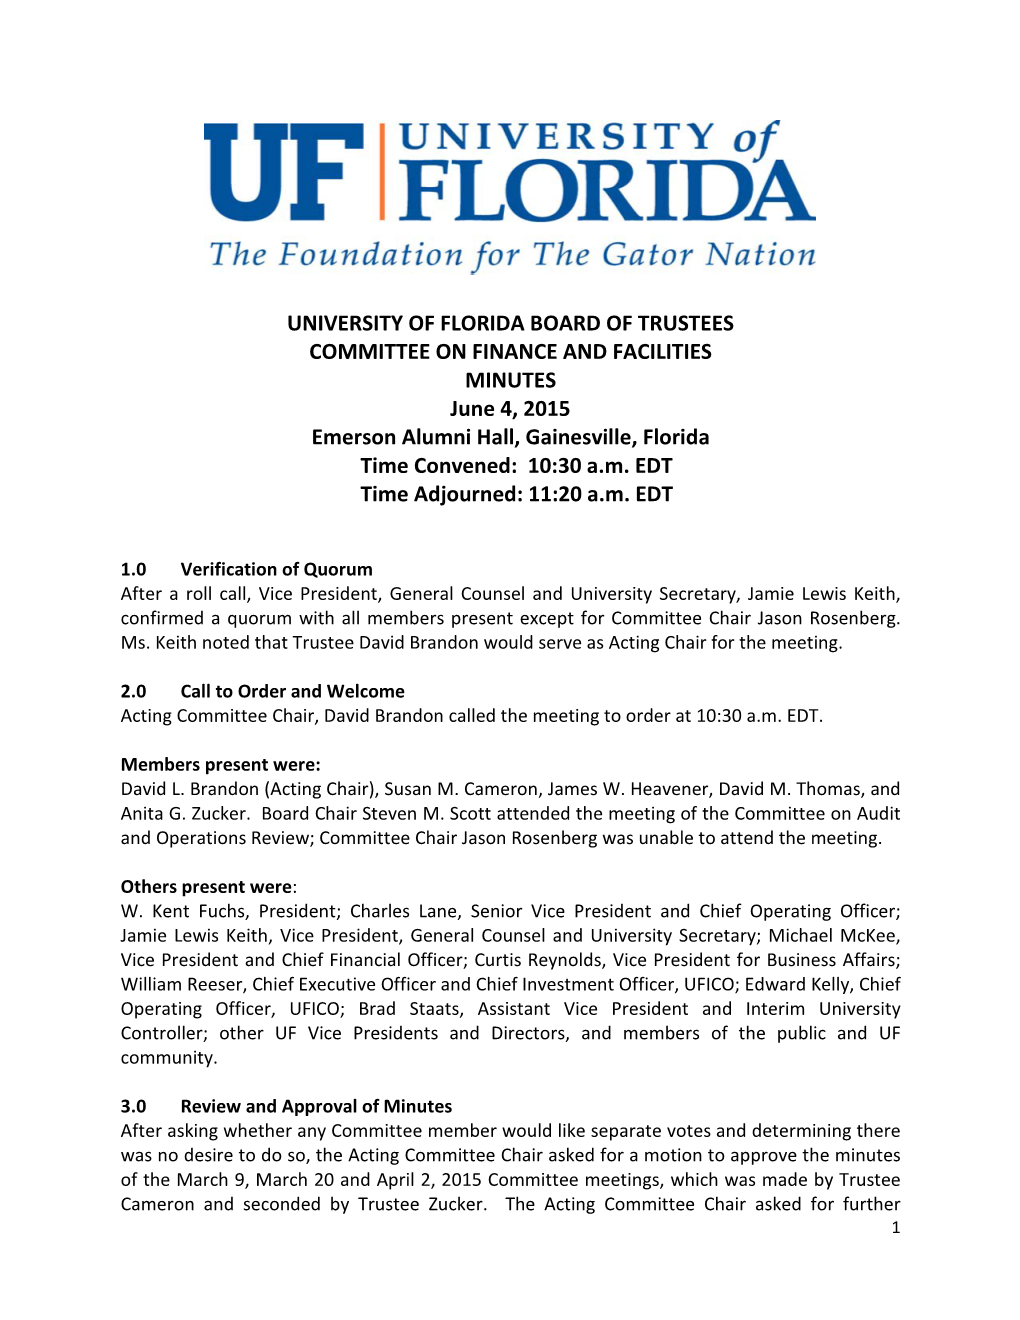 UNIVERSITY of FLORIDA BOARD of TRUSTEES COMMITTEE on FINANCE and FACILITIES MINUTES June 4, 2015 Emerson Alumni Hall, Gainesville, Florida Time Convened: 10:30 A.M